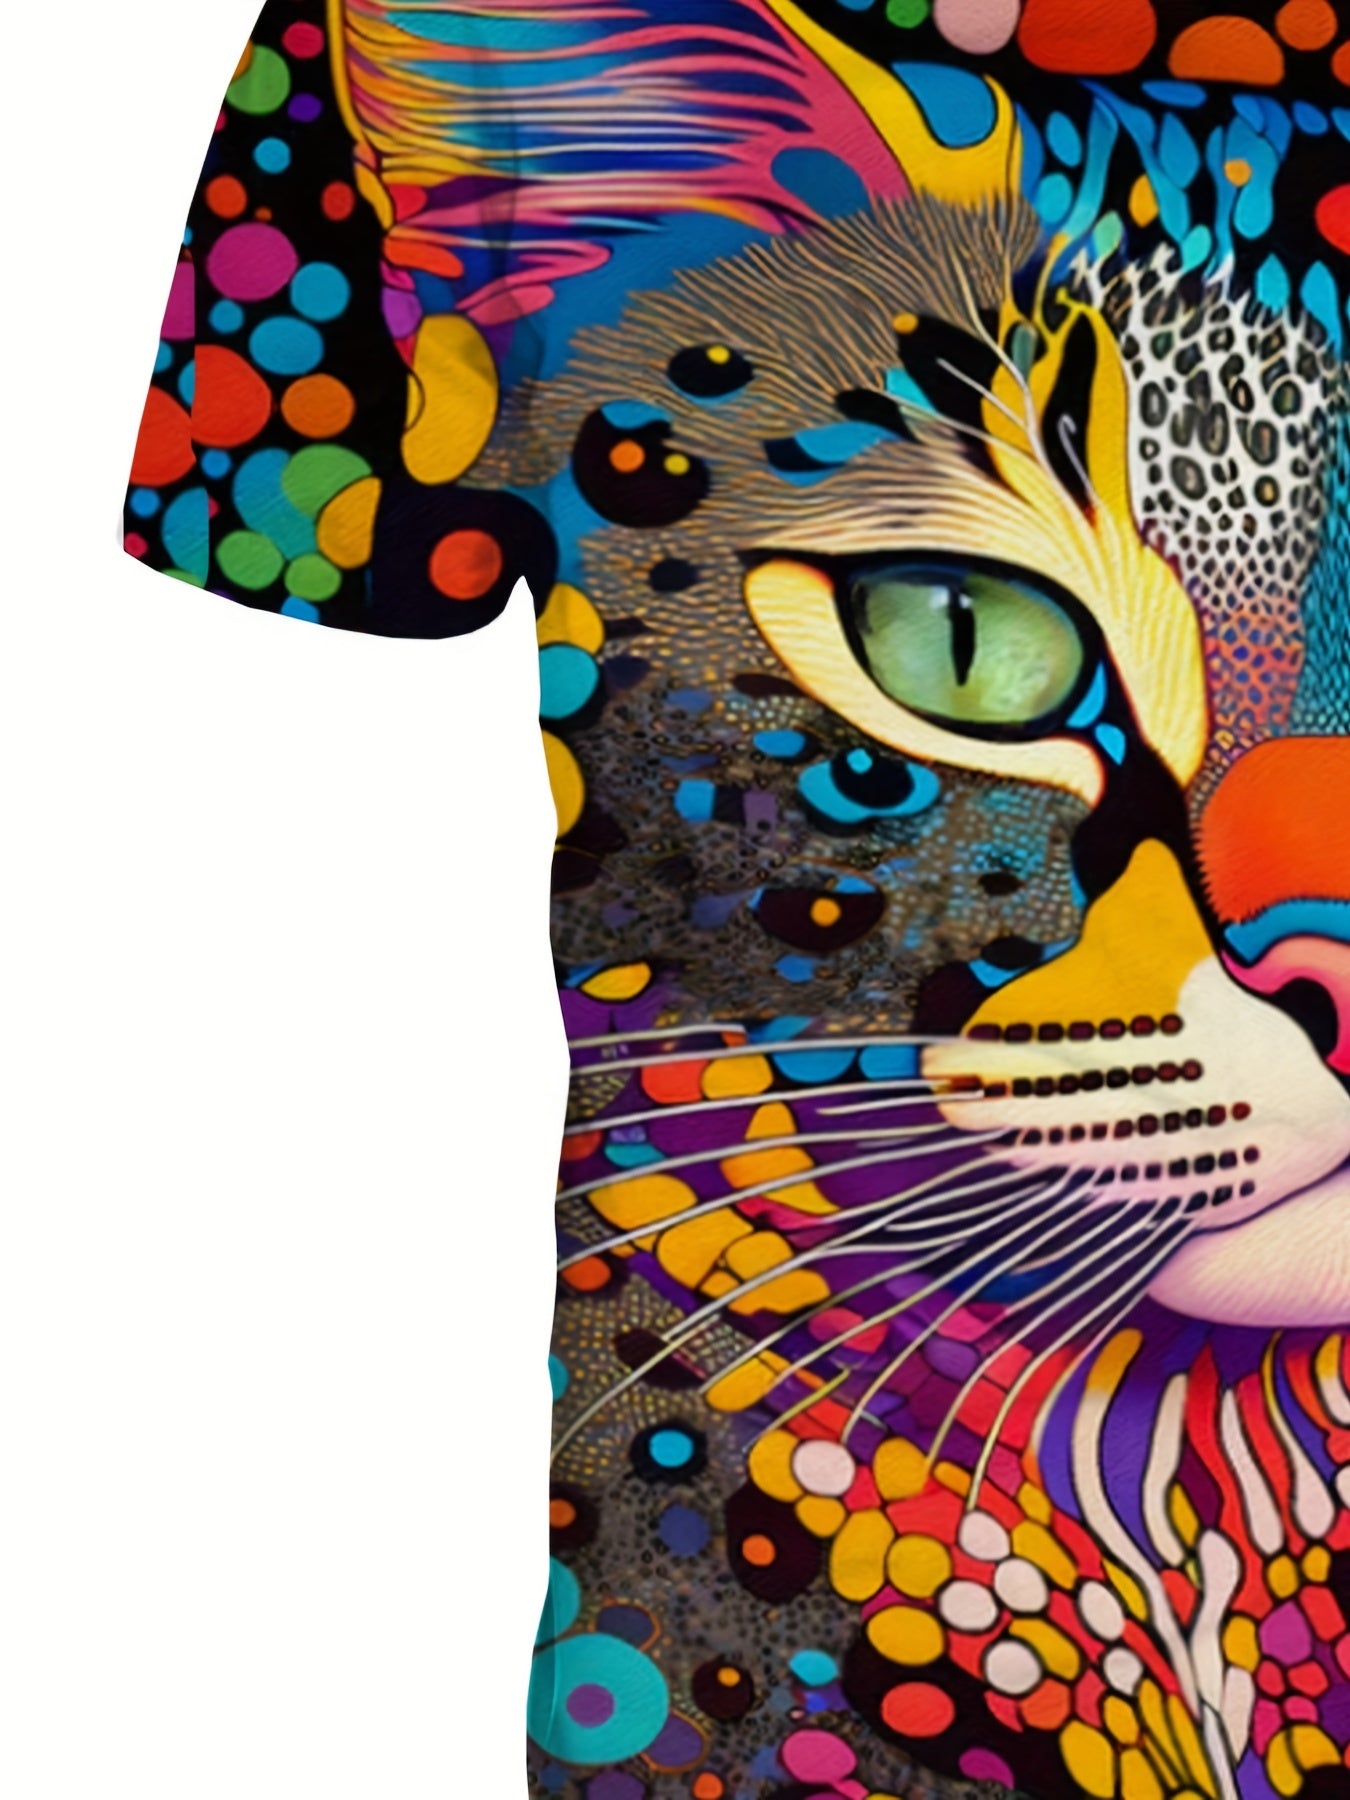 Colorful Art Cat 3D Digital Pattern Print Men's Graphic T-shirts, Causal Comfy Tees, Short Sleeves Comfortable Pullover Tops, Men's Summer Clothing